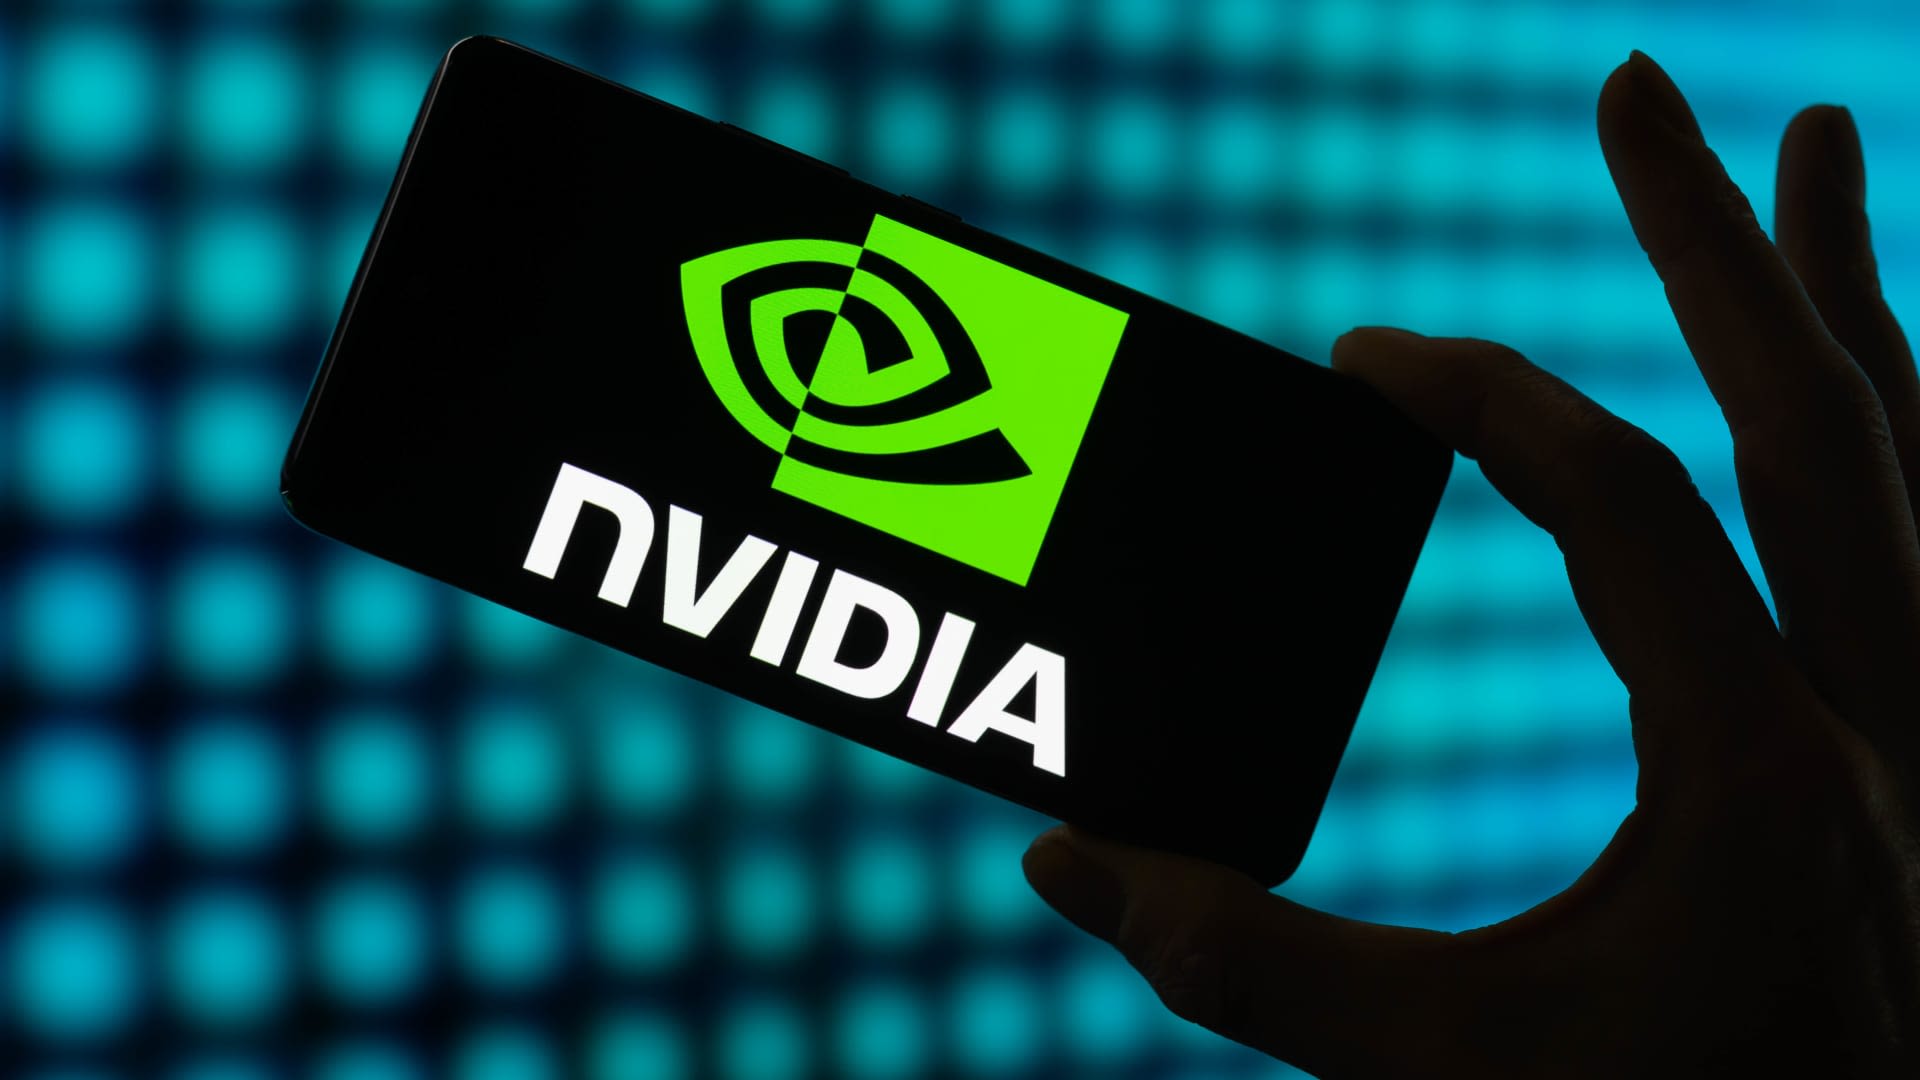 Morgan Stanley says Nvidia's GPU cooling needs are a $4.8 billion opportunity, names stocks to benefit